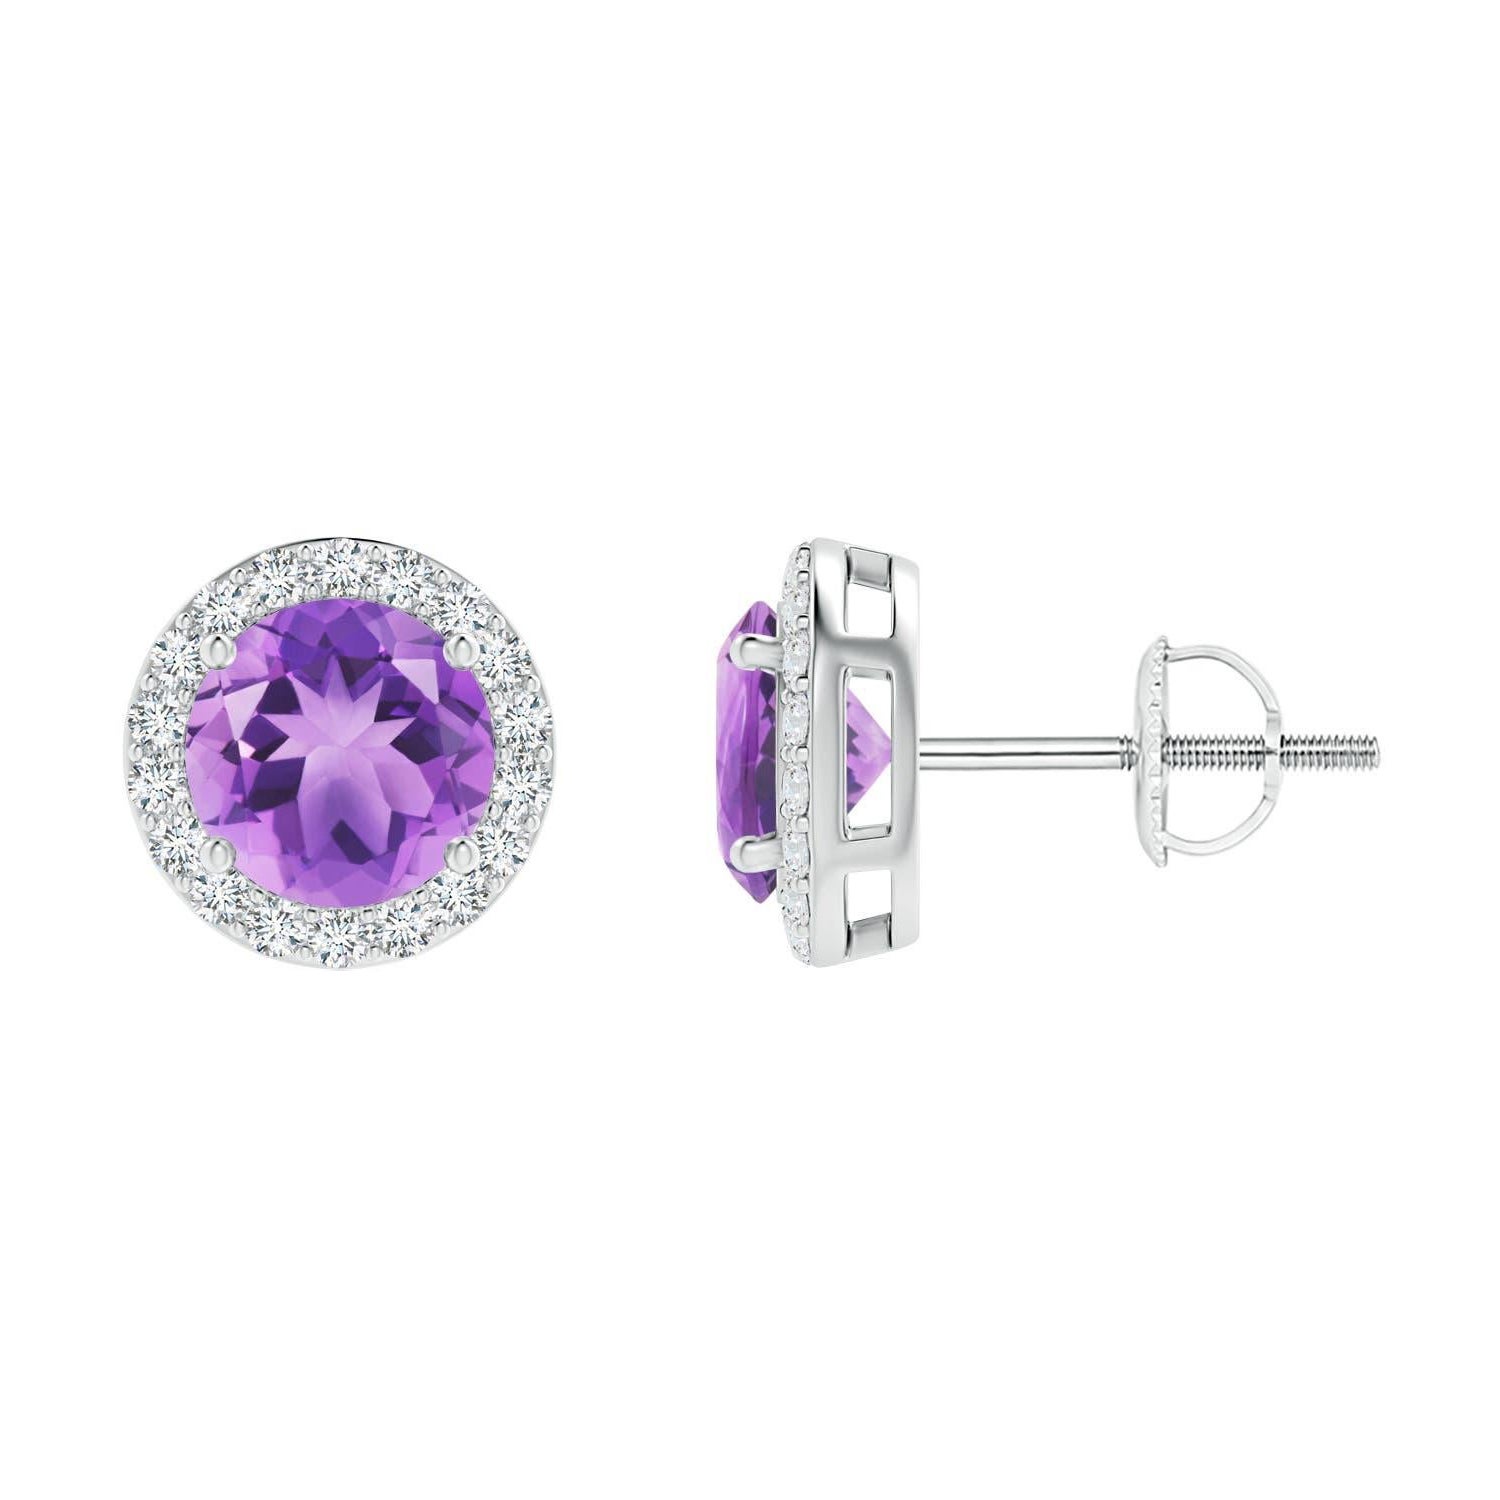 Natural Vintage Round 1.6ct Amethyst Halo Stud Earrings in Platinum For Sale